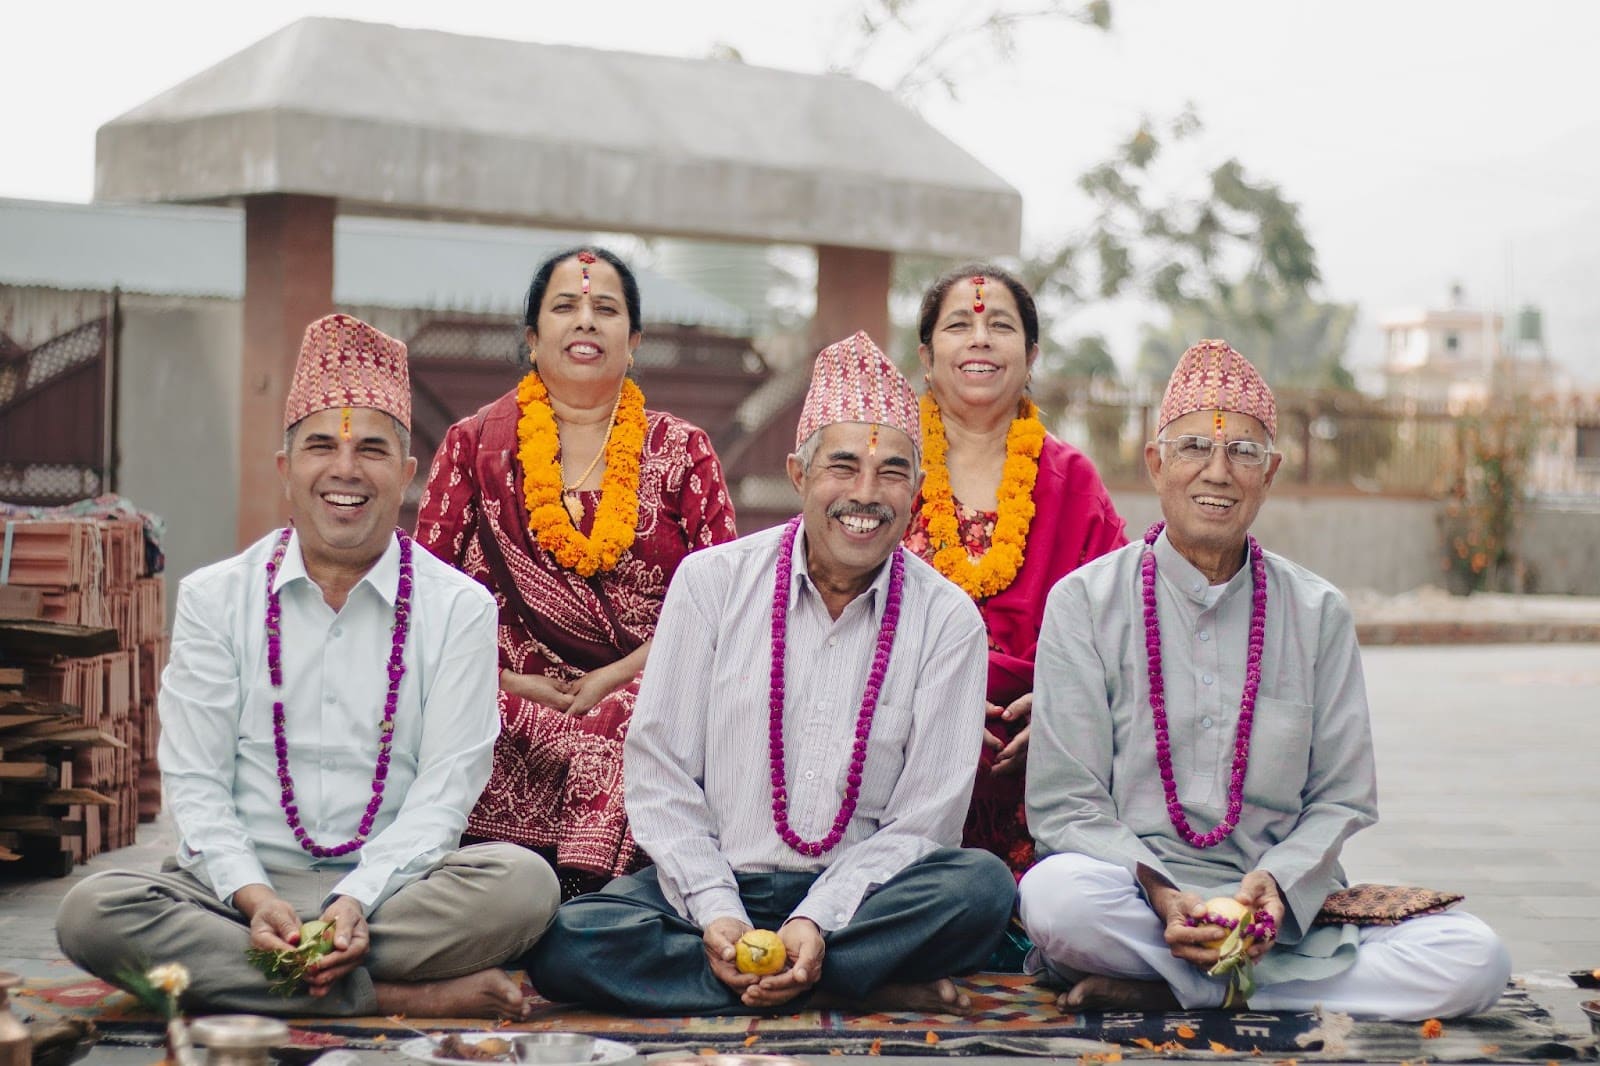 Five People In Nepal In Traditional Clothes.